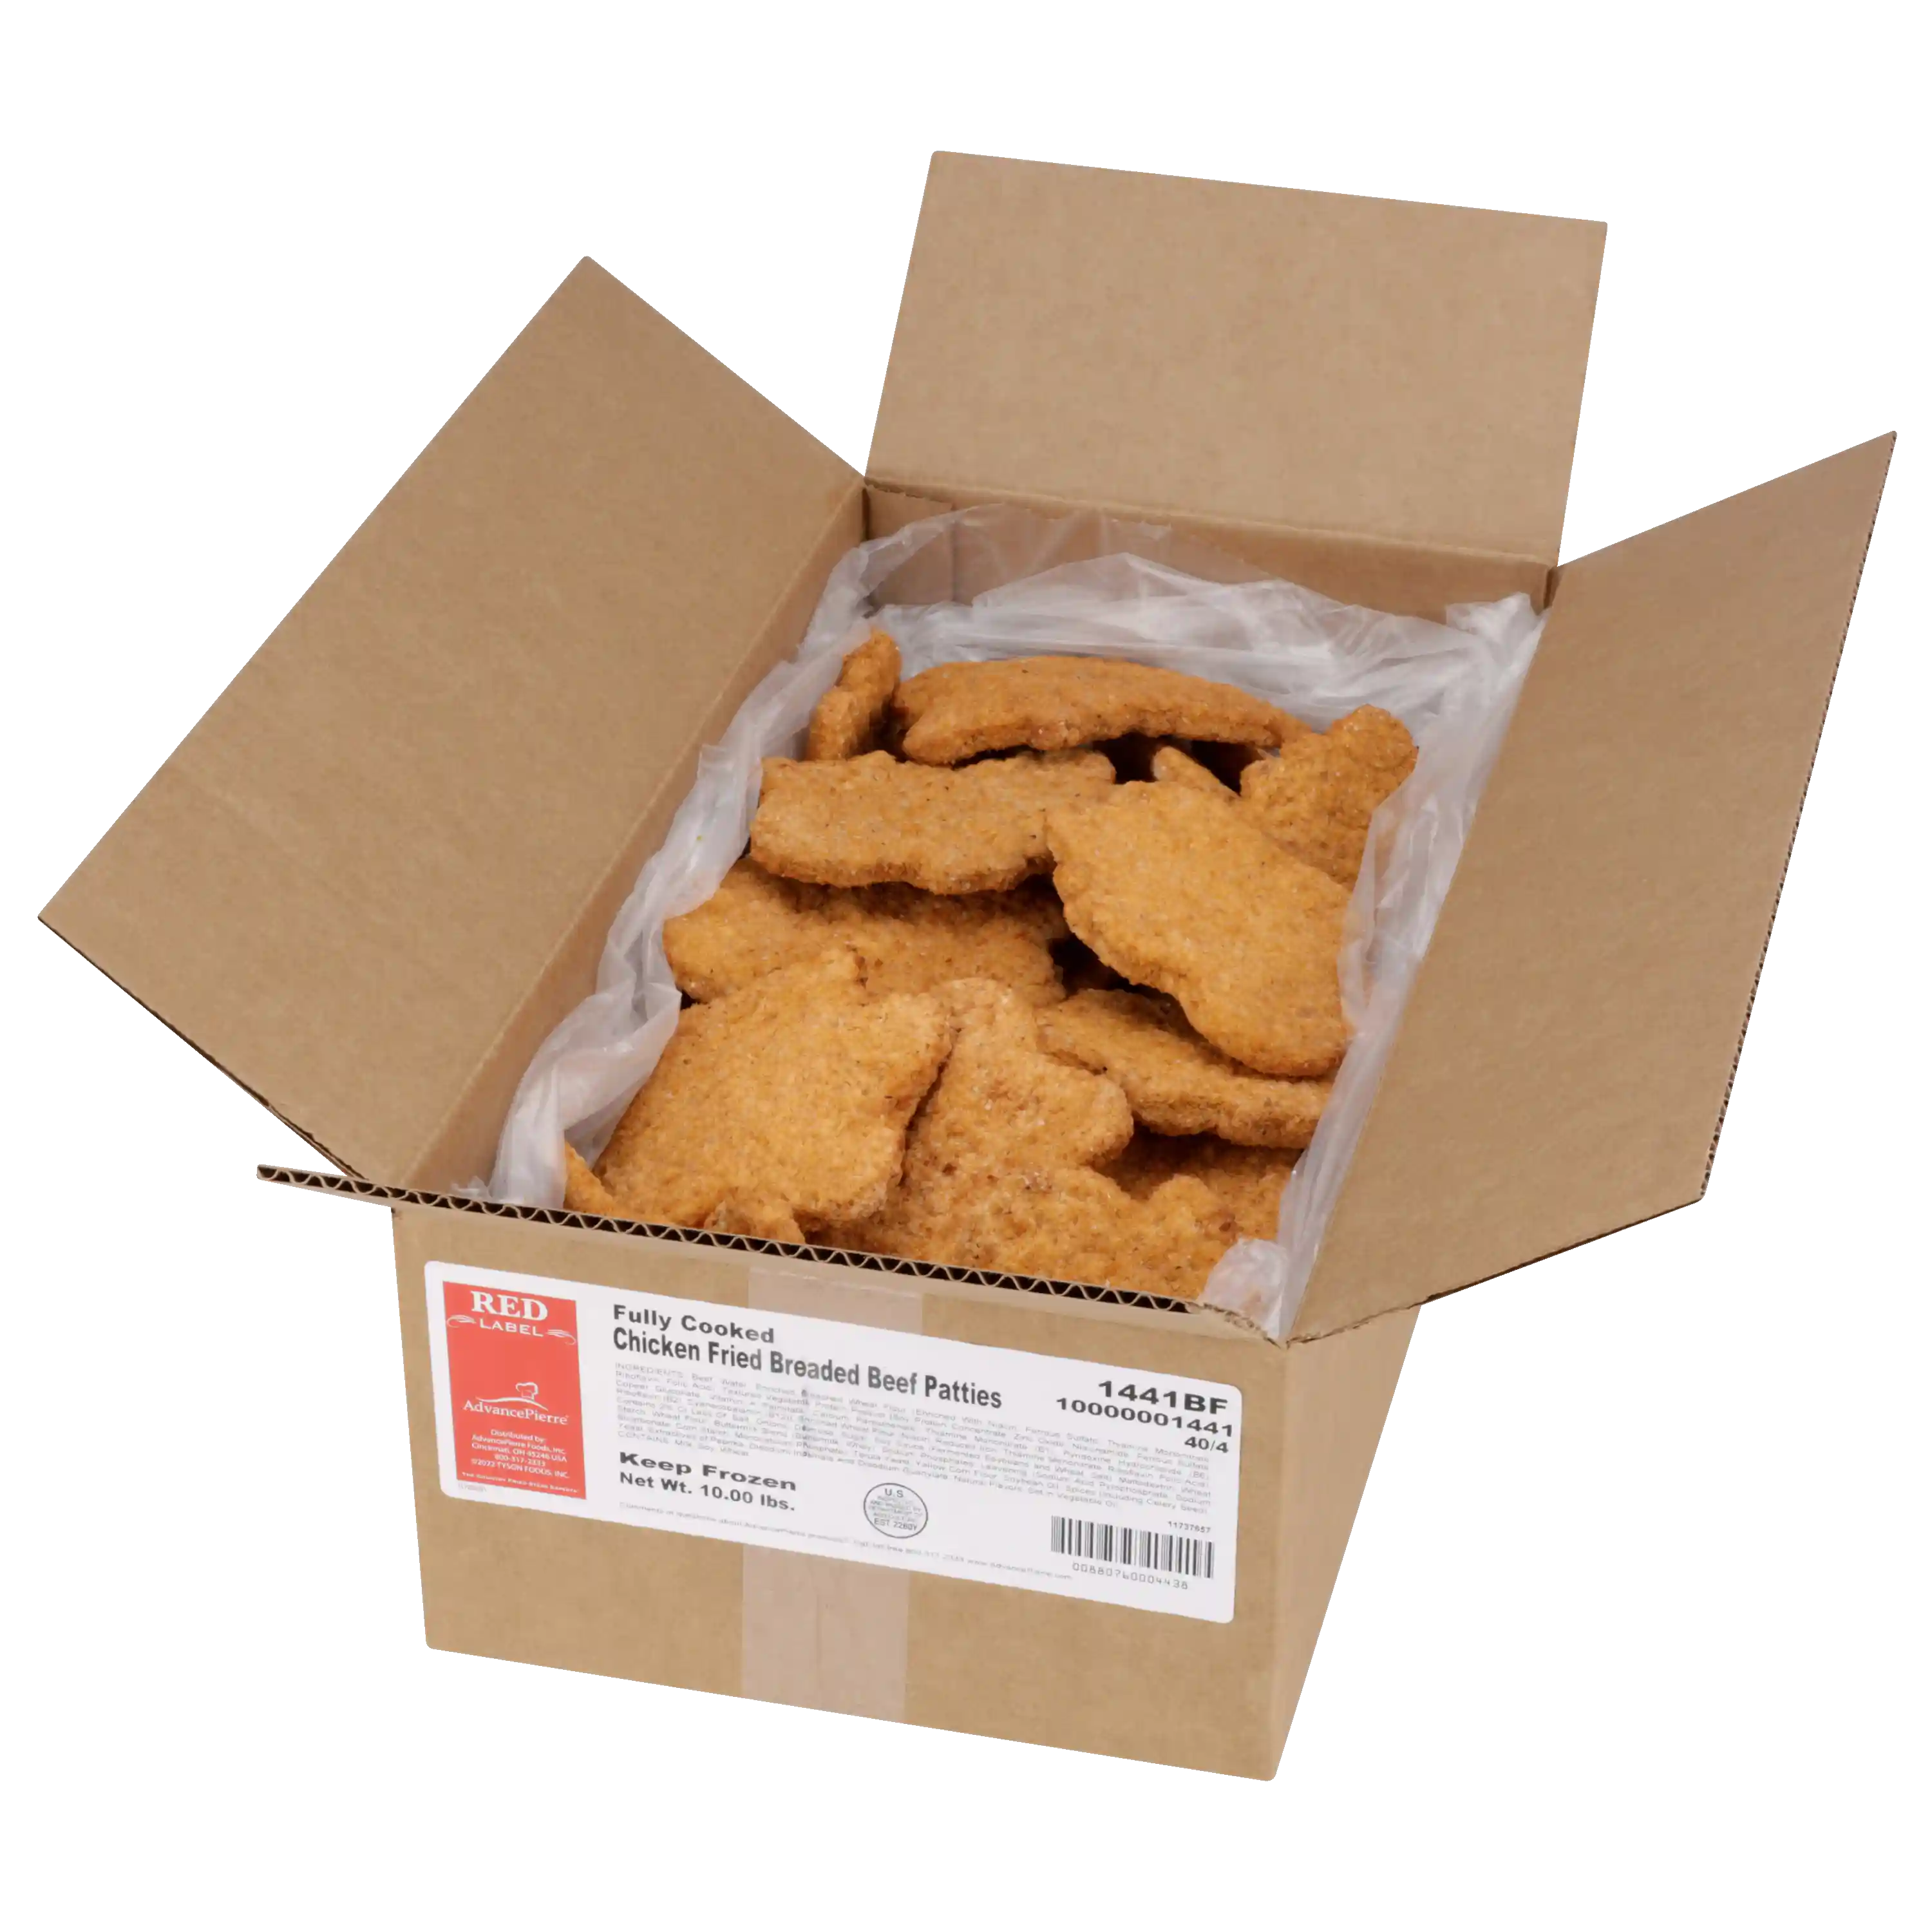 AdvancePierre™ Red Label Fully Cooked Breaded Western Crumb Style Country Fried Beef Patties, 4 oz_image_31